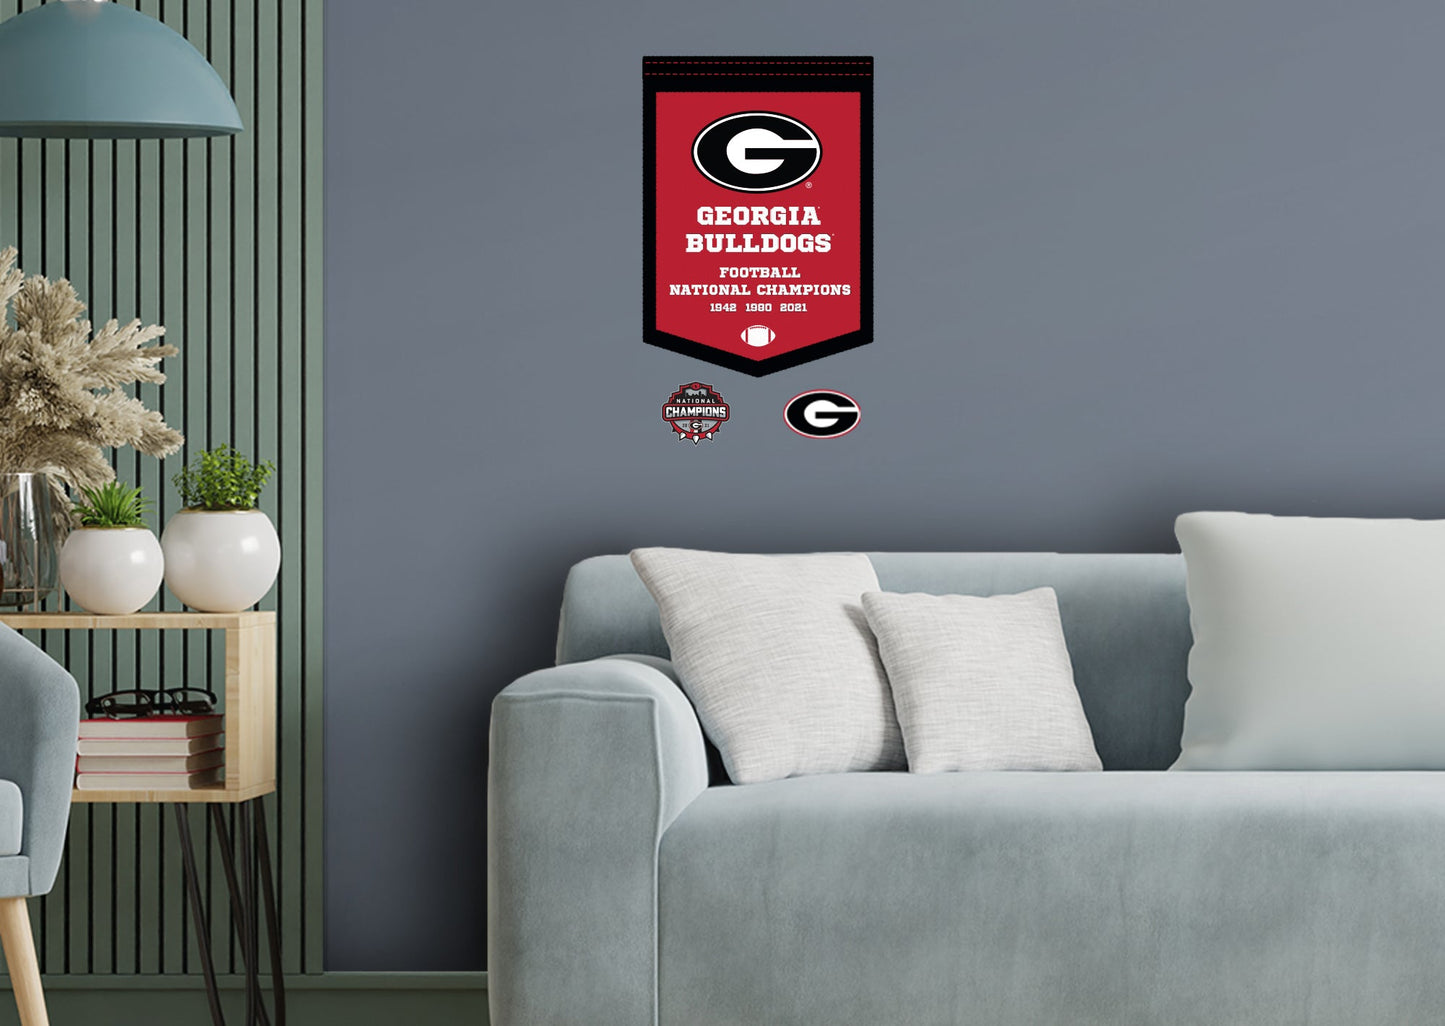 Georgia Bulldogs: 2021 Football Championships Banner - Officially Licensed NCAA Removable Adhesive Decal